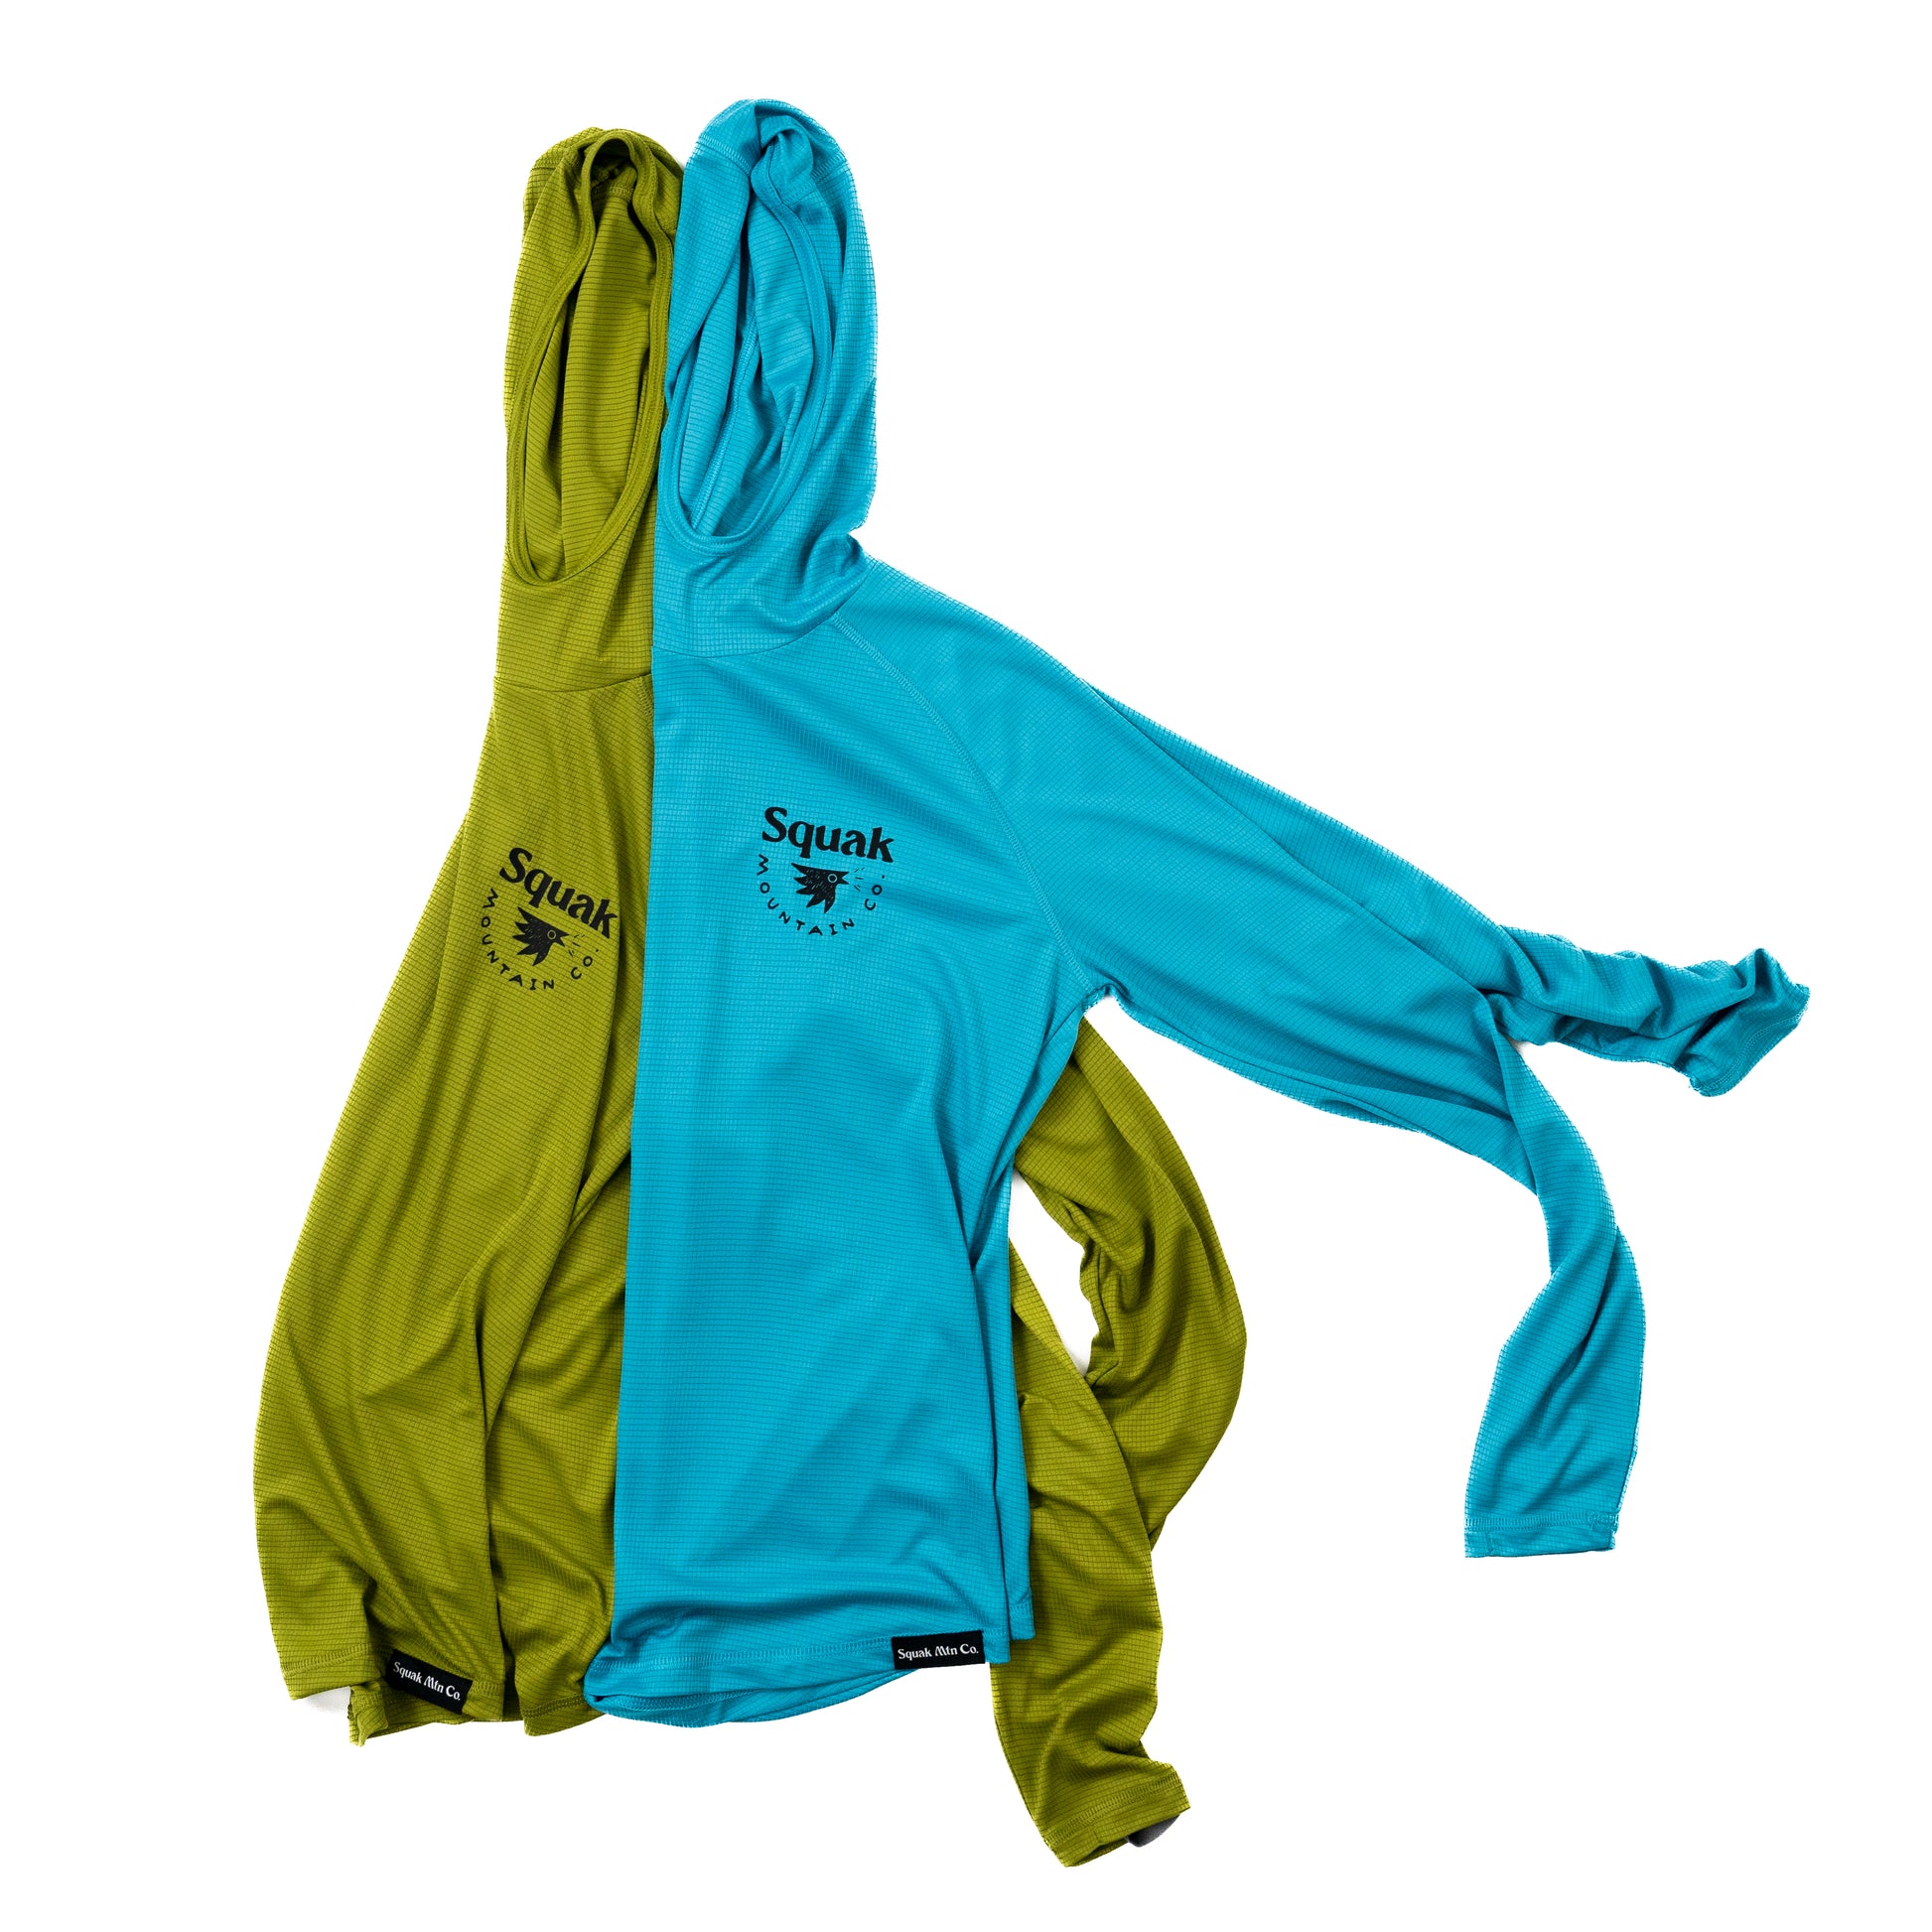 Aqua blue and light green outdoor sun hoodie from Squak Mountain Co.